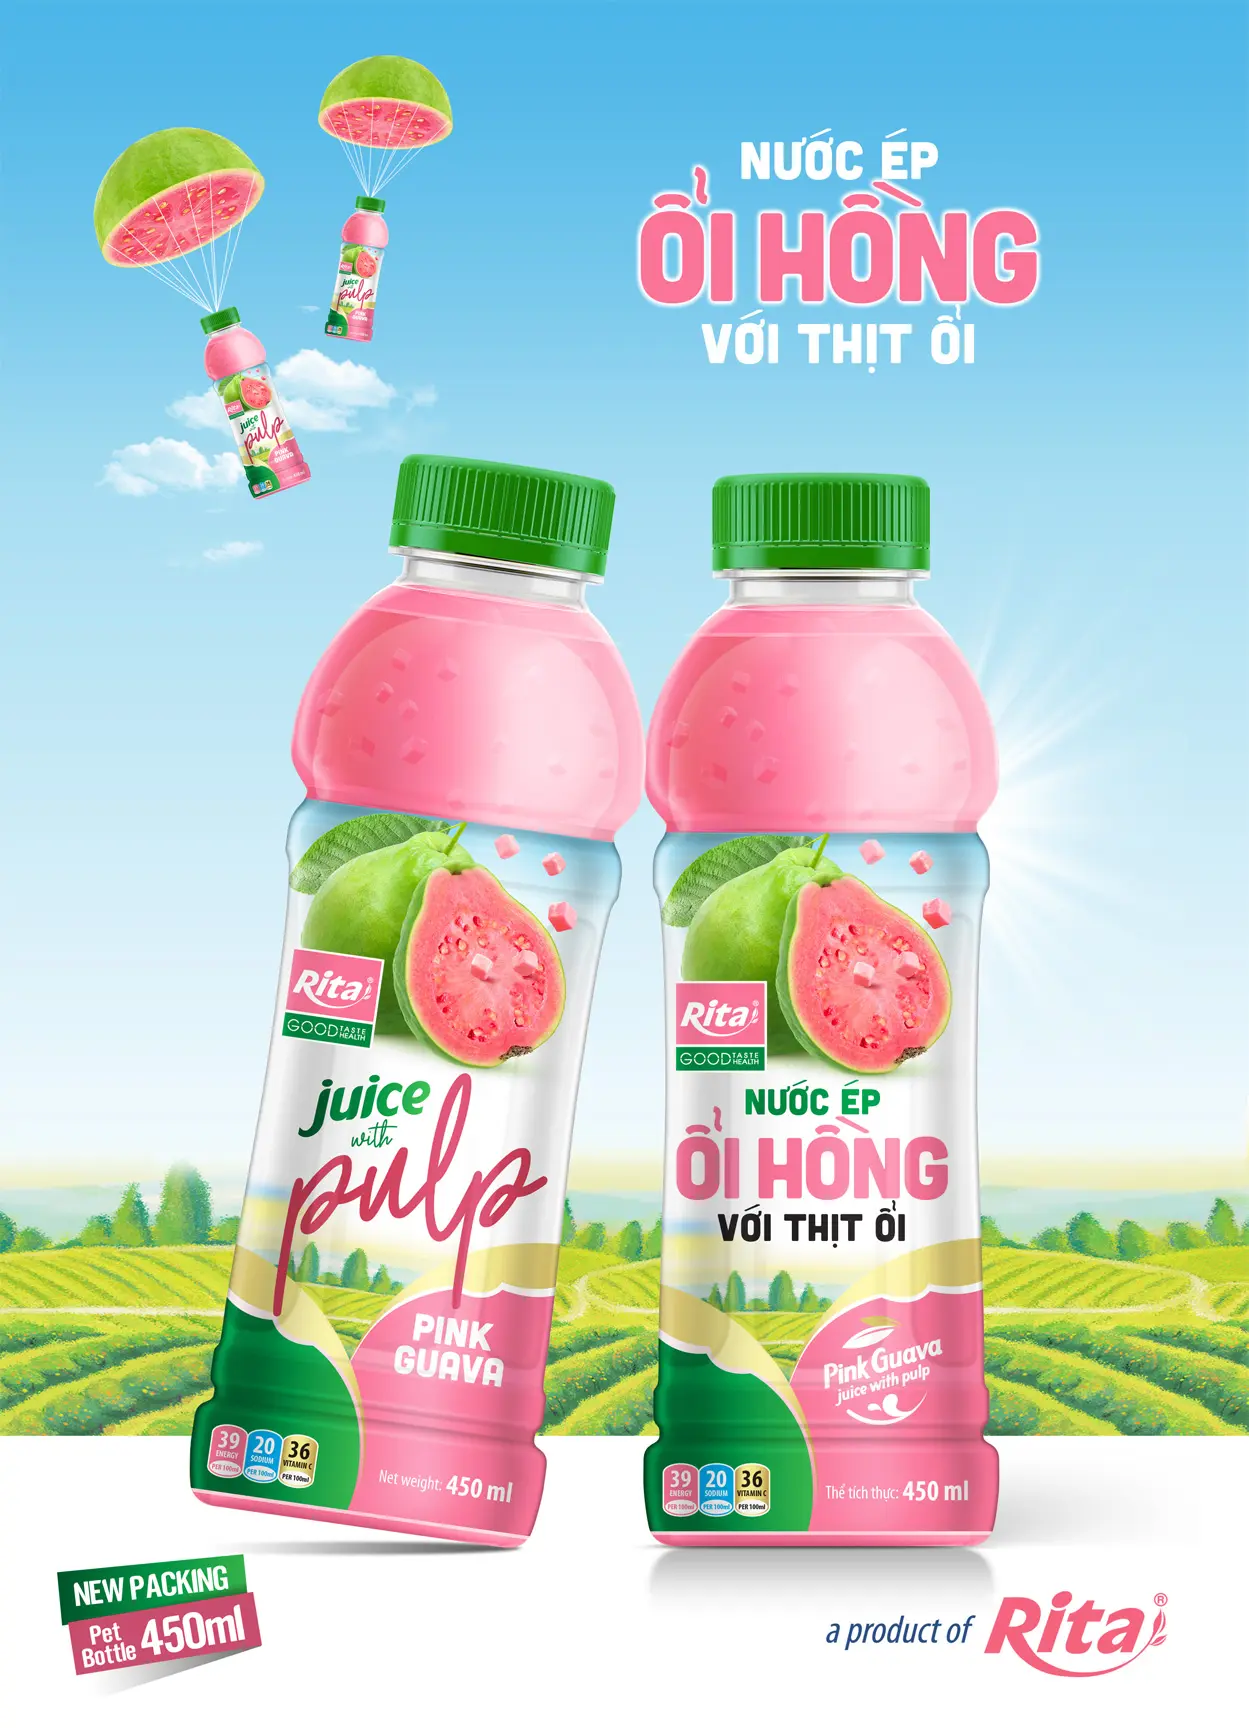 Guava juice with Pulp 450ml Pet